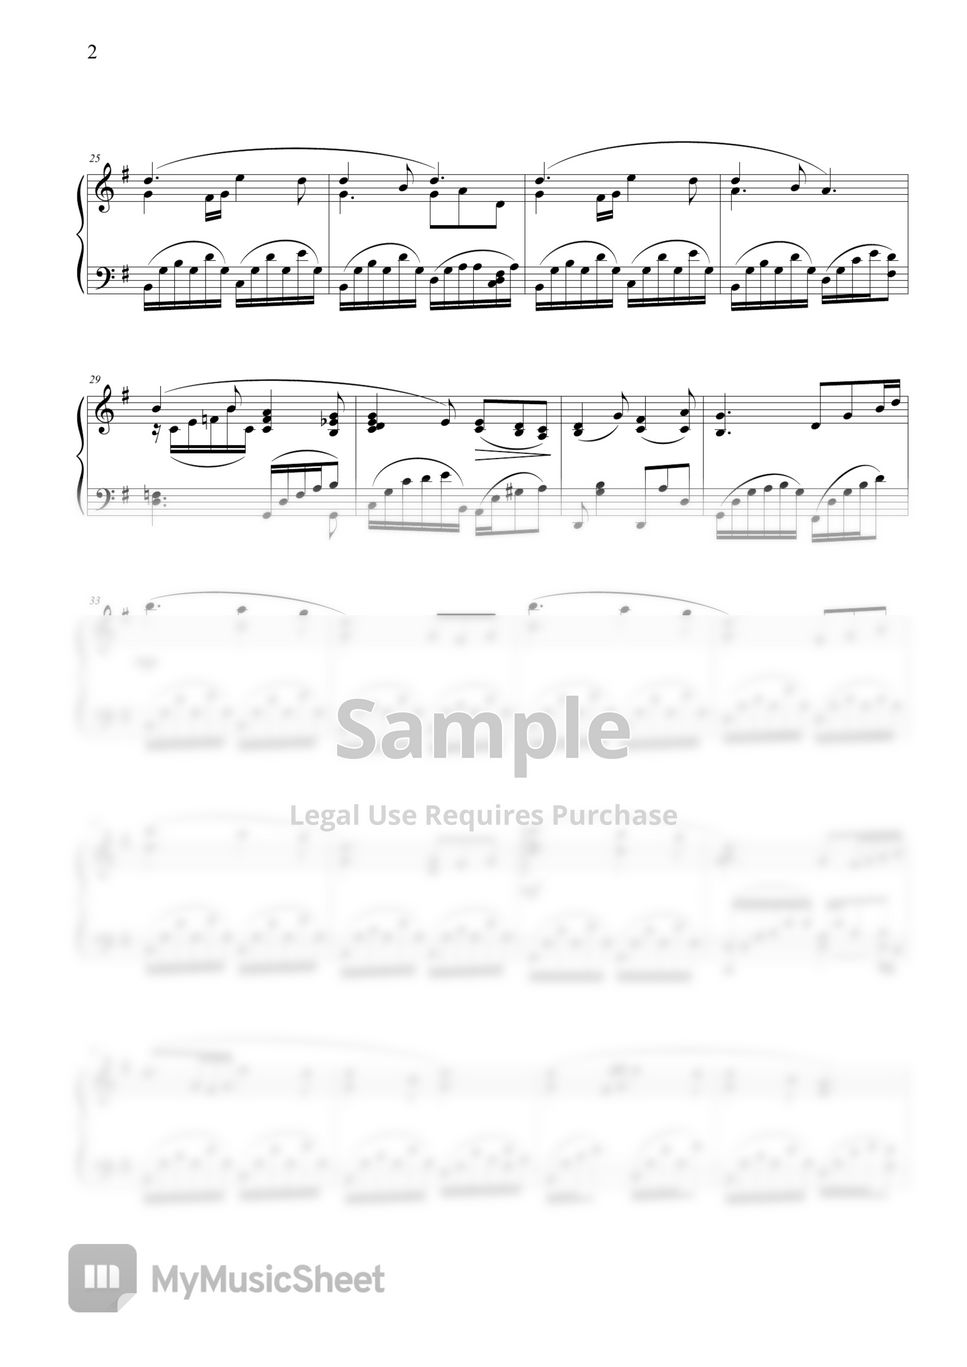 HYMN - Nearer My God to Thee (Piano Arrangement) by Hwan ho Jung